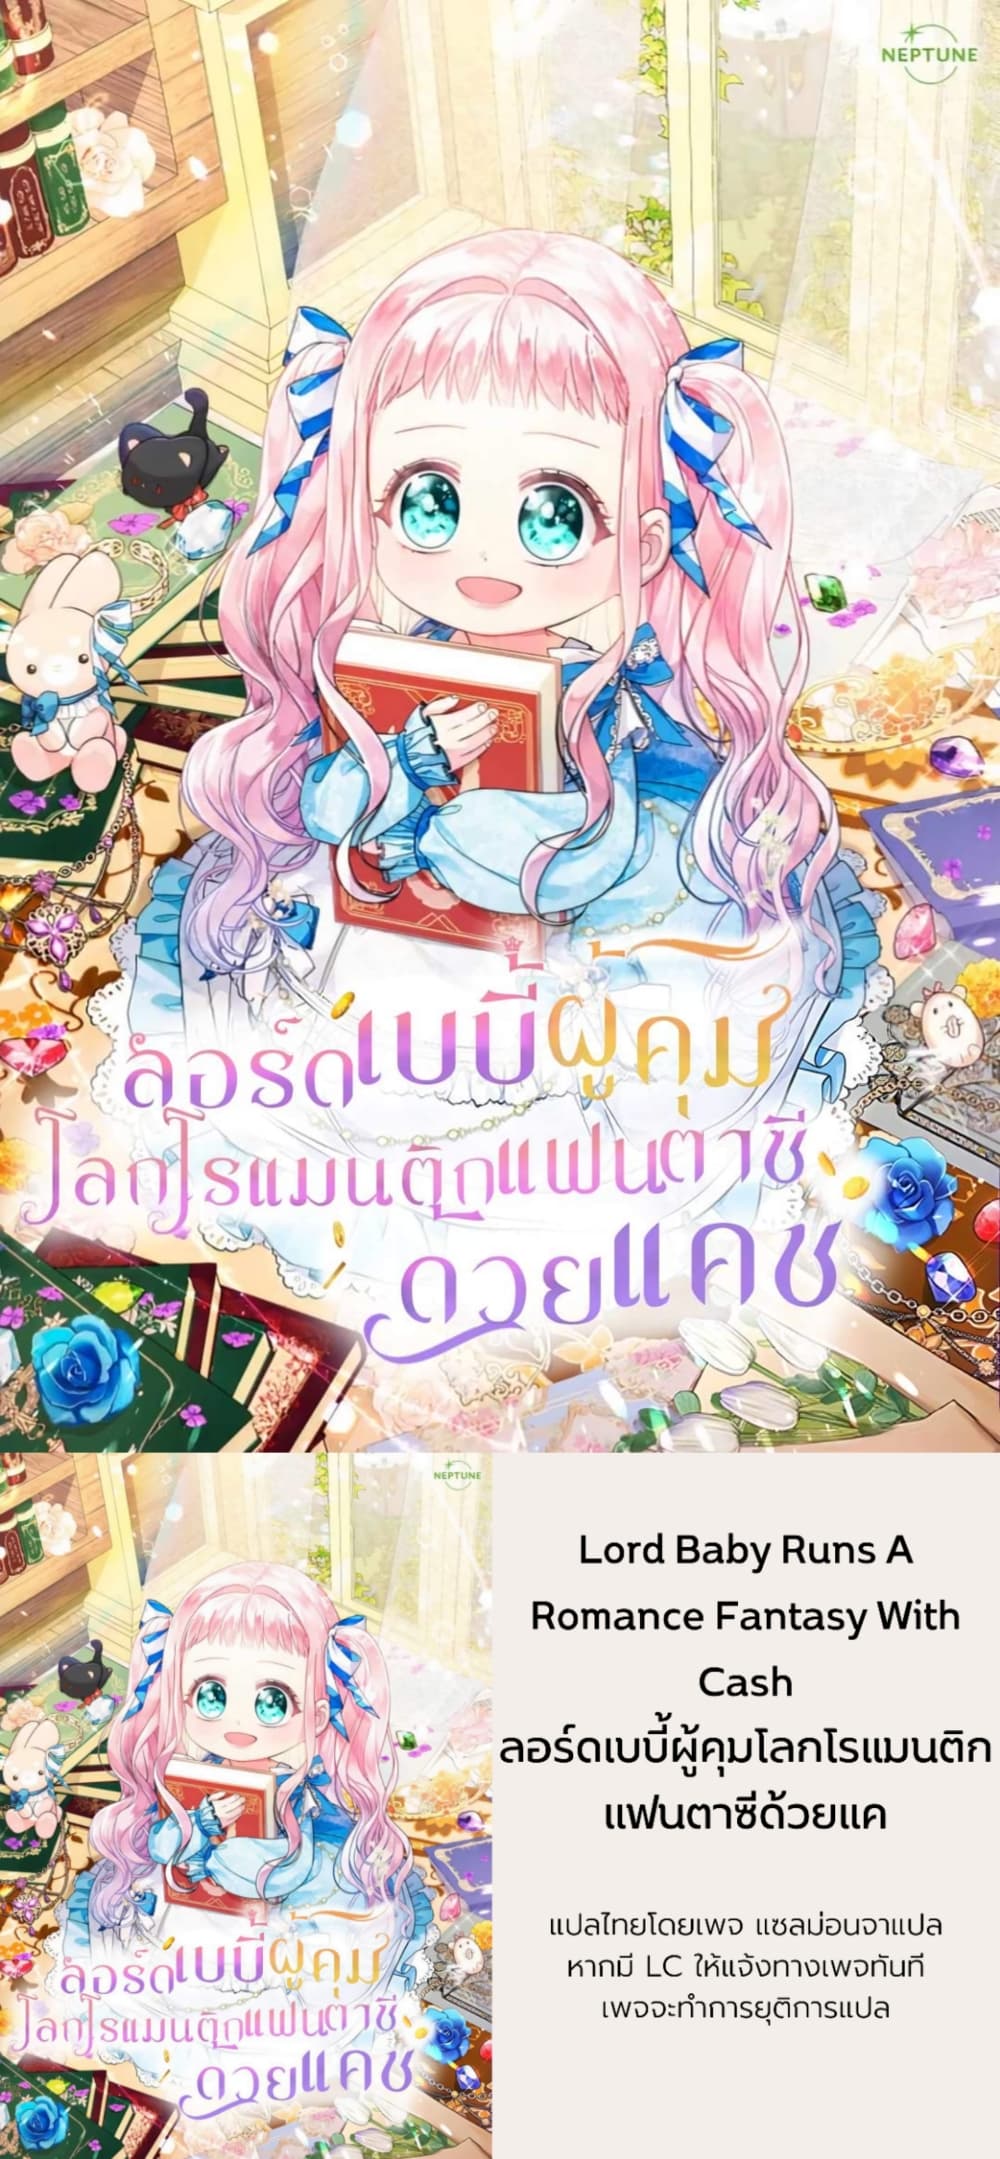 Lord Baby Runs a Romance Fantasy With Cash 3-3